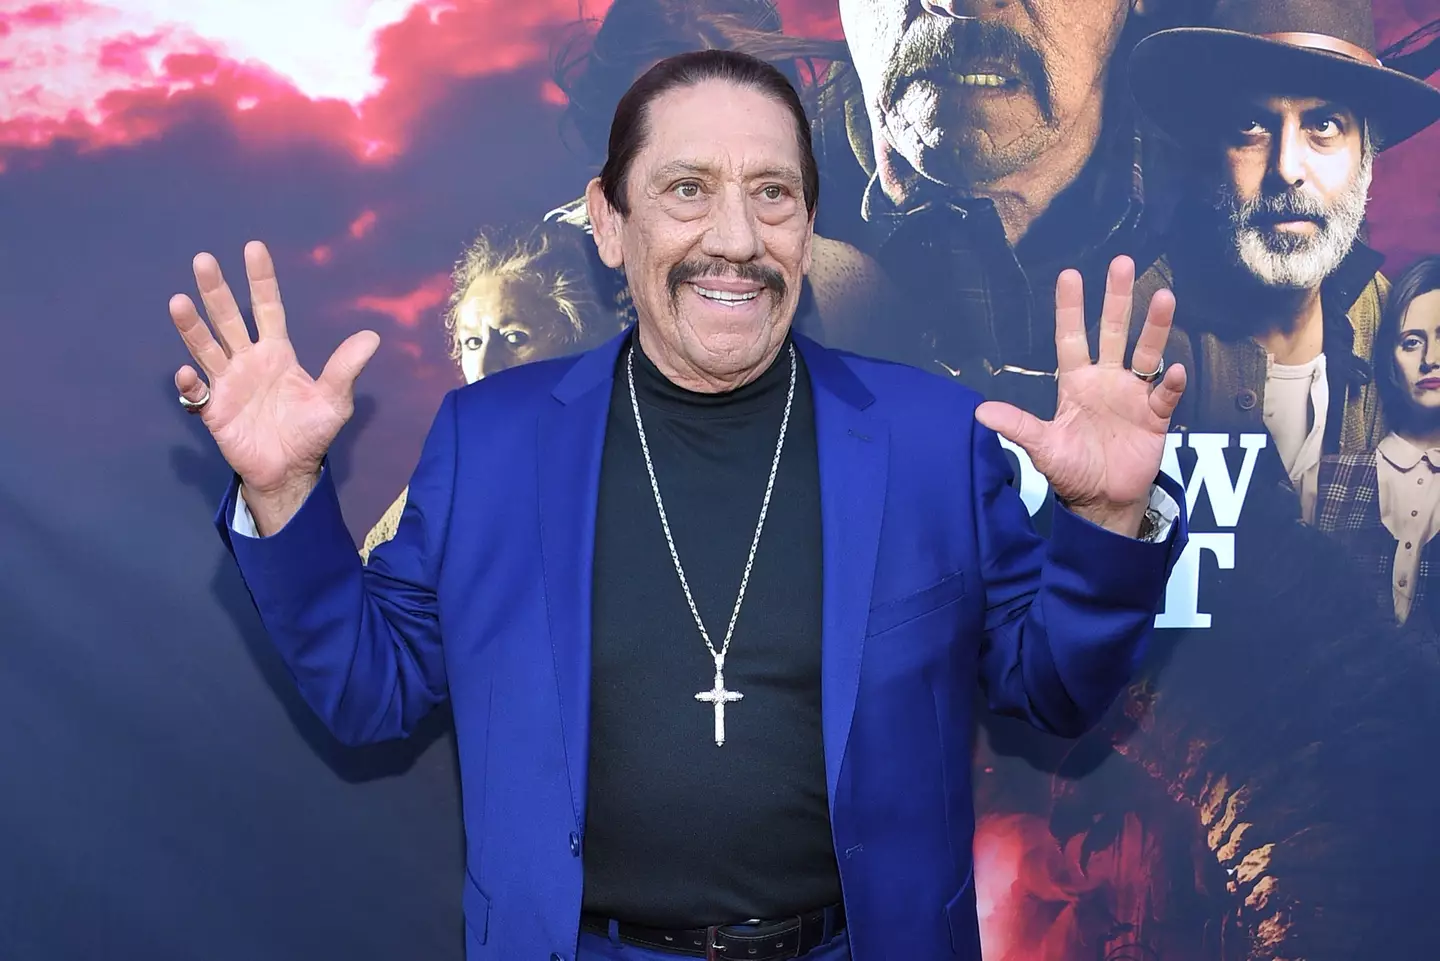 Danny Trejo doesn't plan to retire anytime soon.